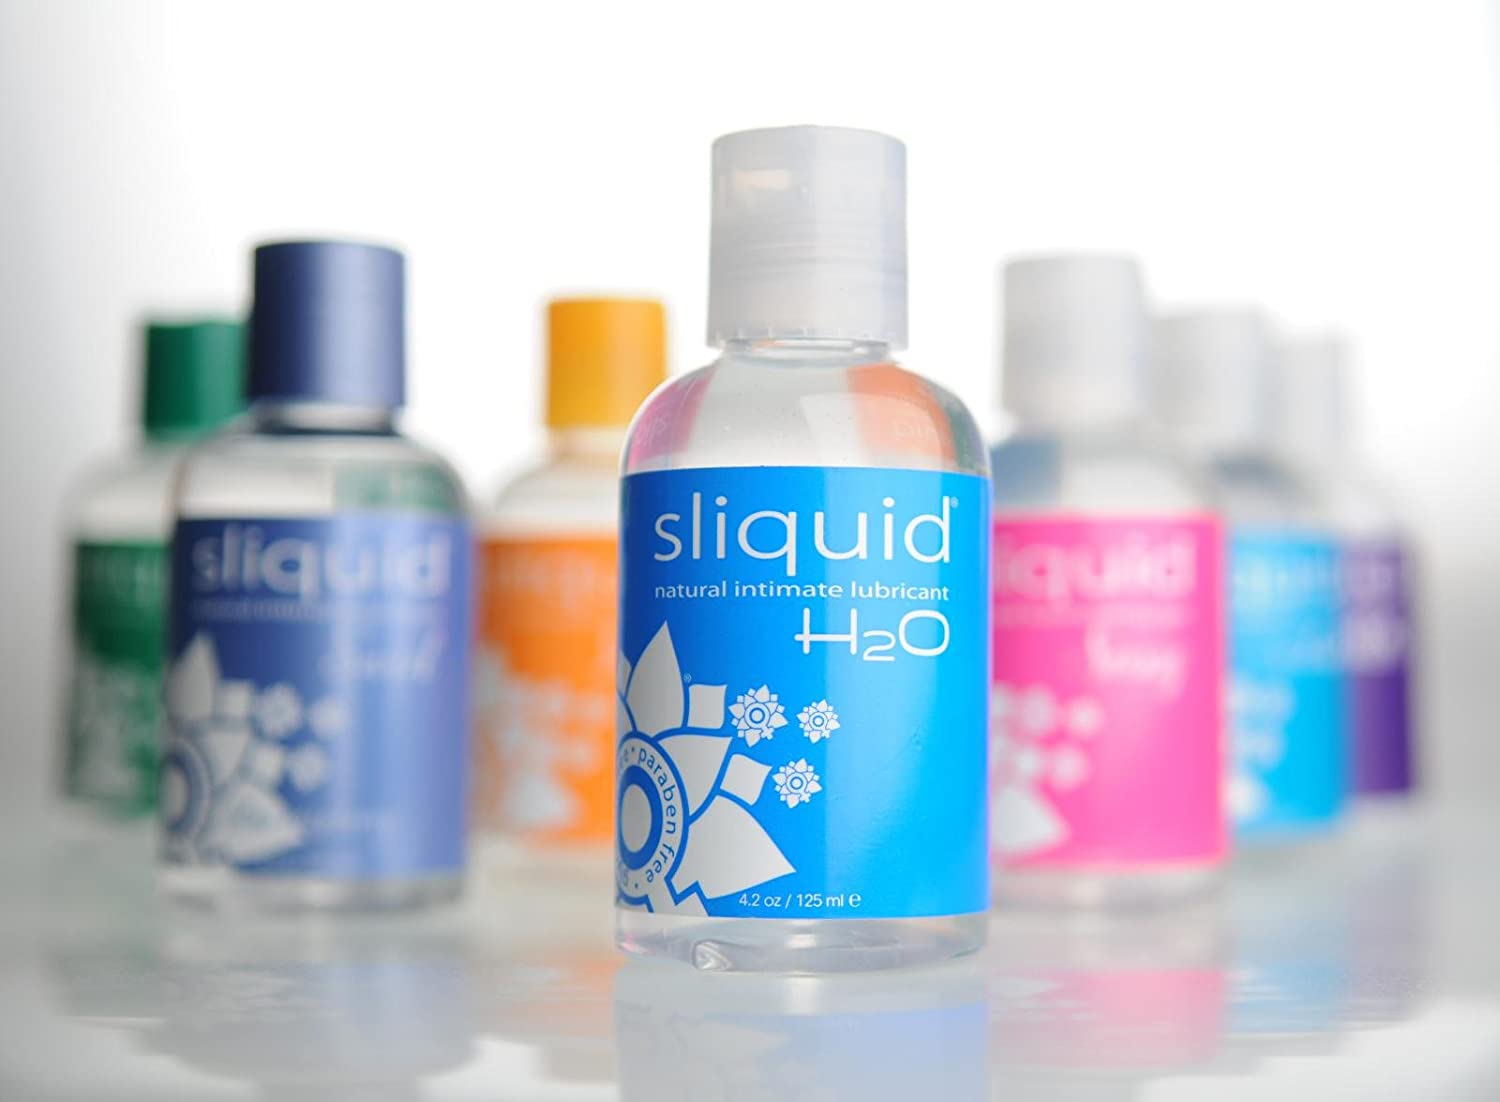 Sliquid lubricants with different packaging colors 